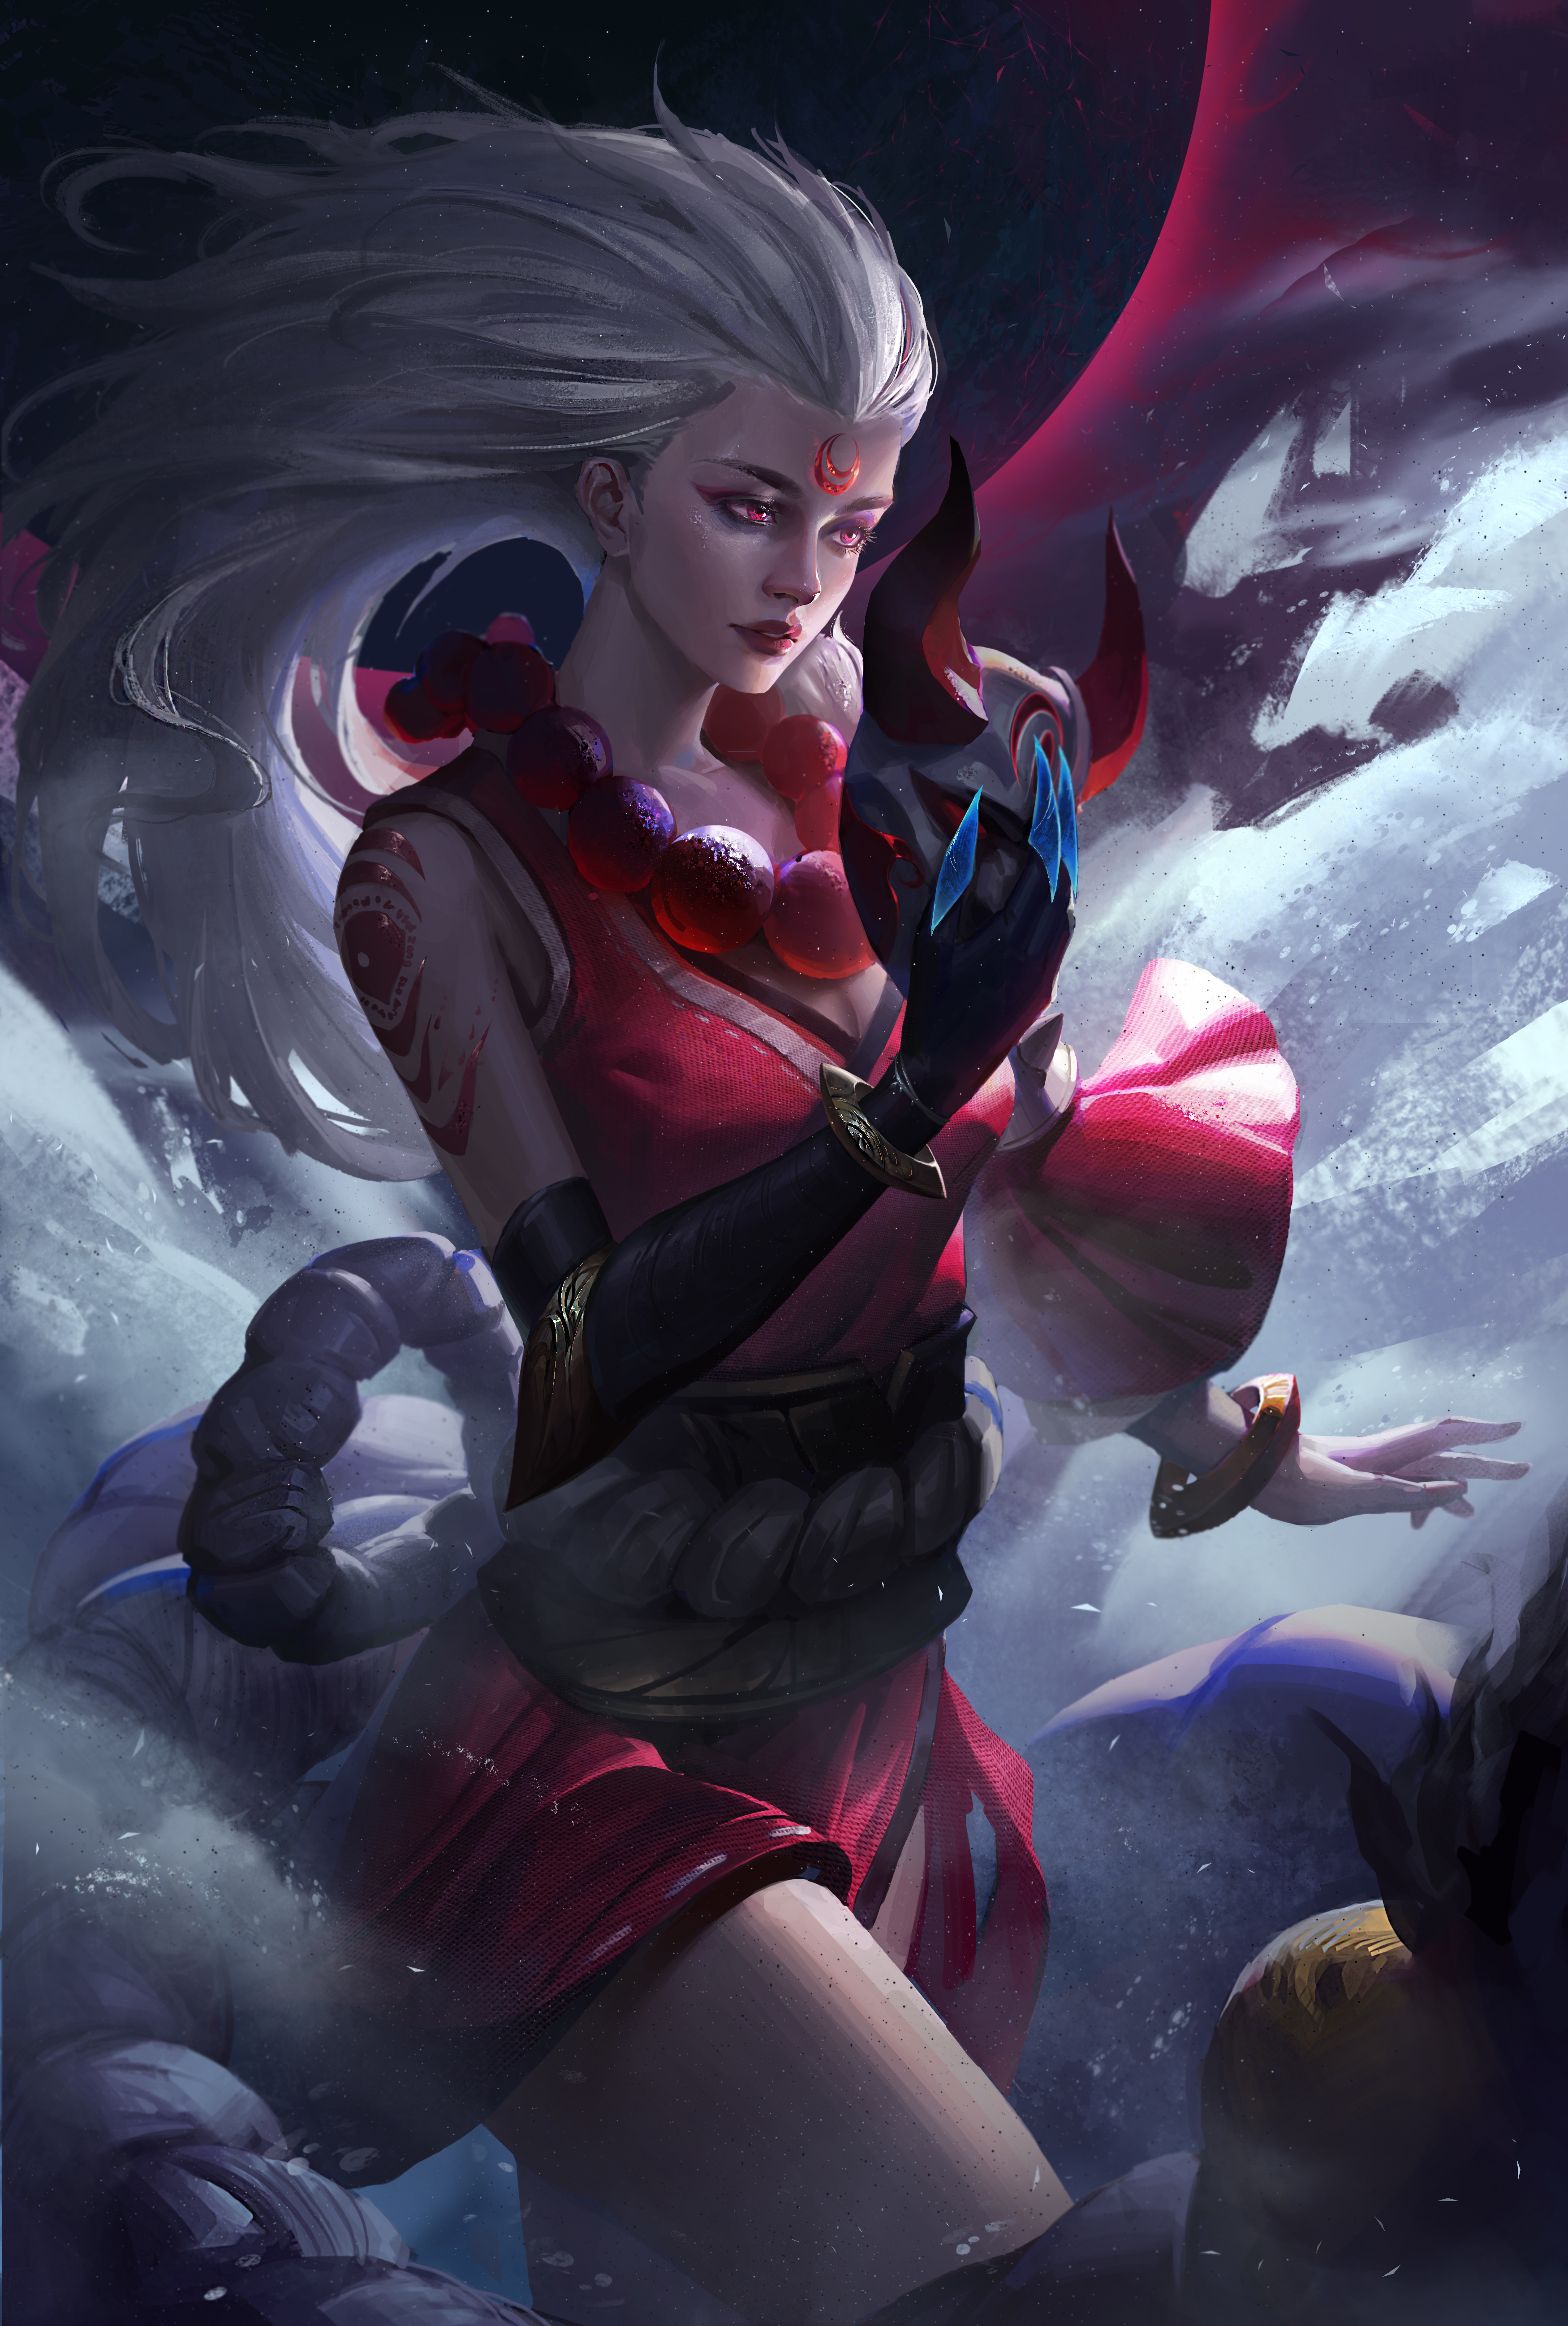 Diana League Of Legends League Of Legends Video Game Characters Video Game Girls Fantasy Girl White  3500x5191